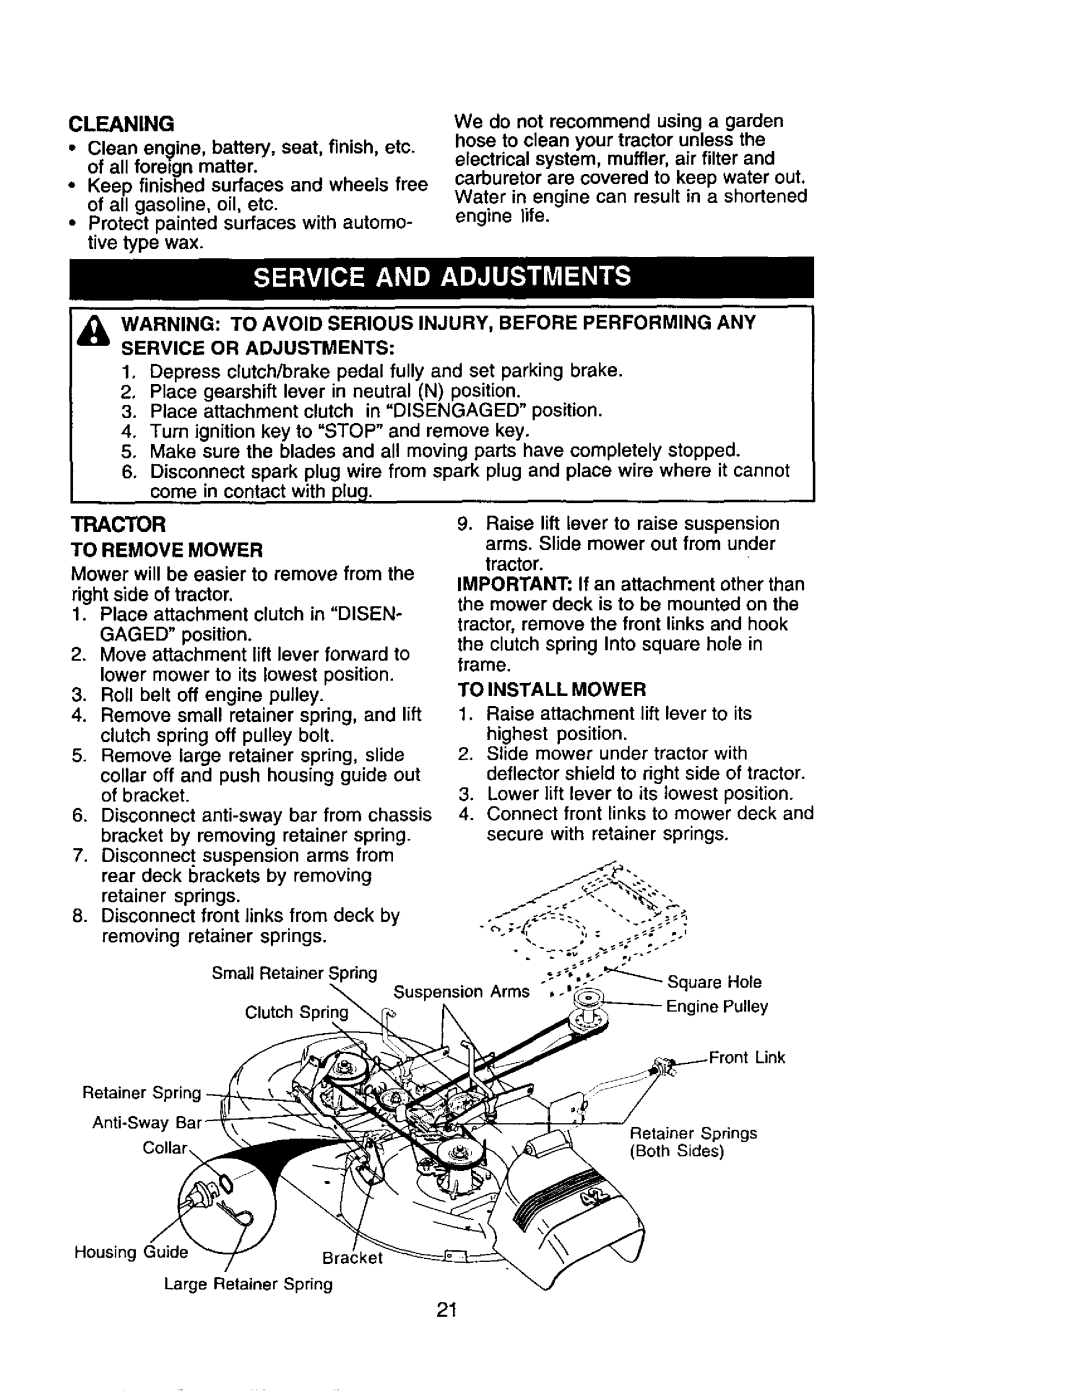 Craftsman 917.271554 owner manual Tractor, Cleaning 